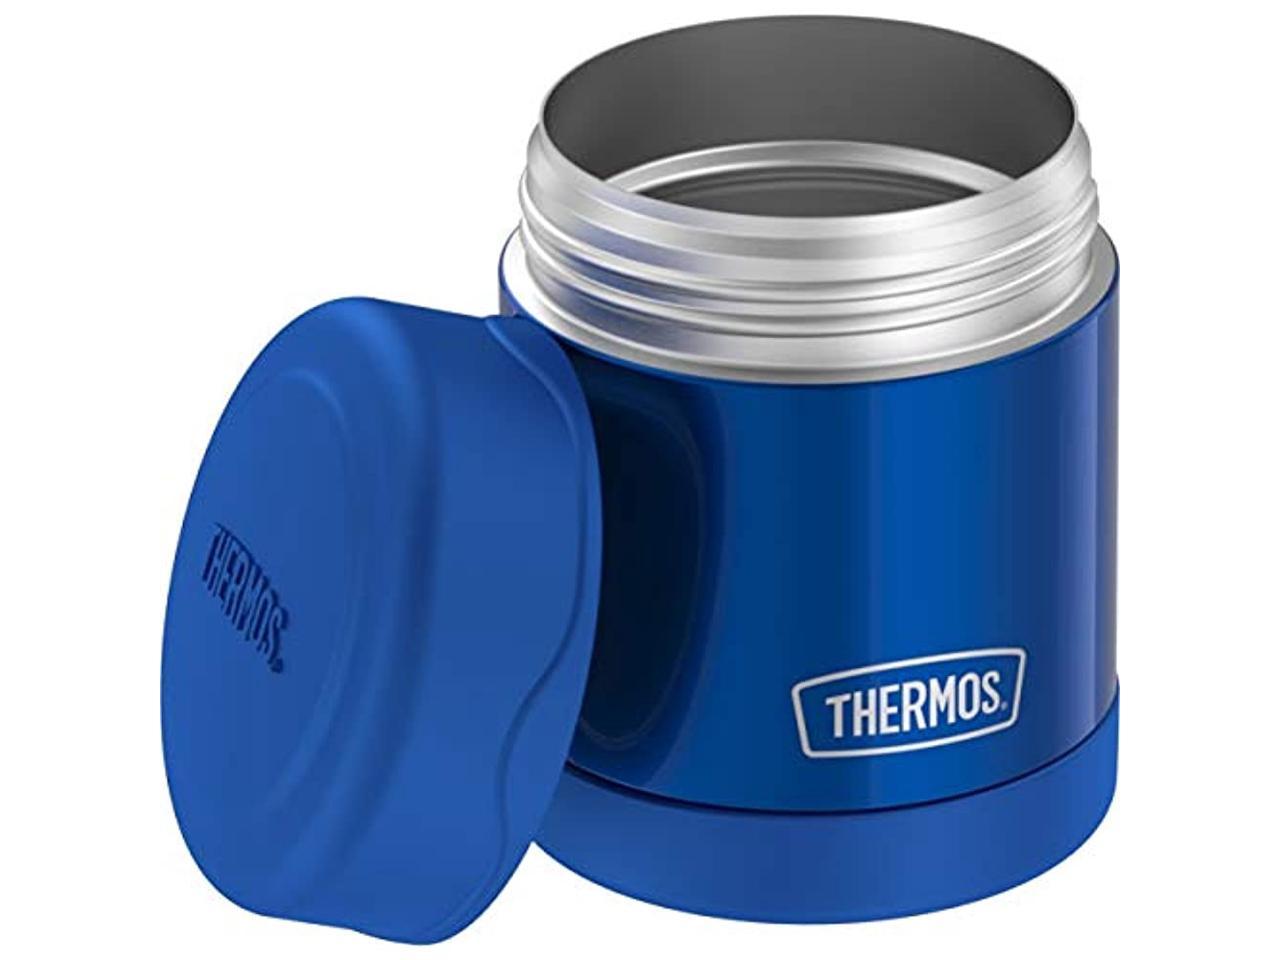 Thermos, 10 oz, Blue, Stainless Steel Vacuum Insulated Food Jar